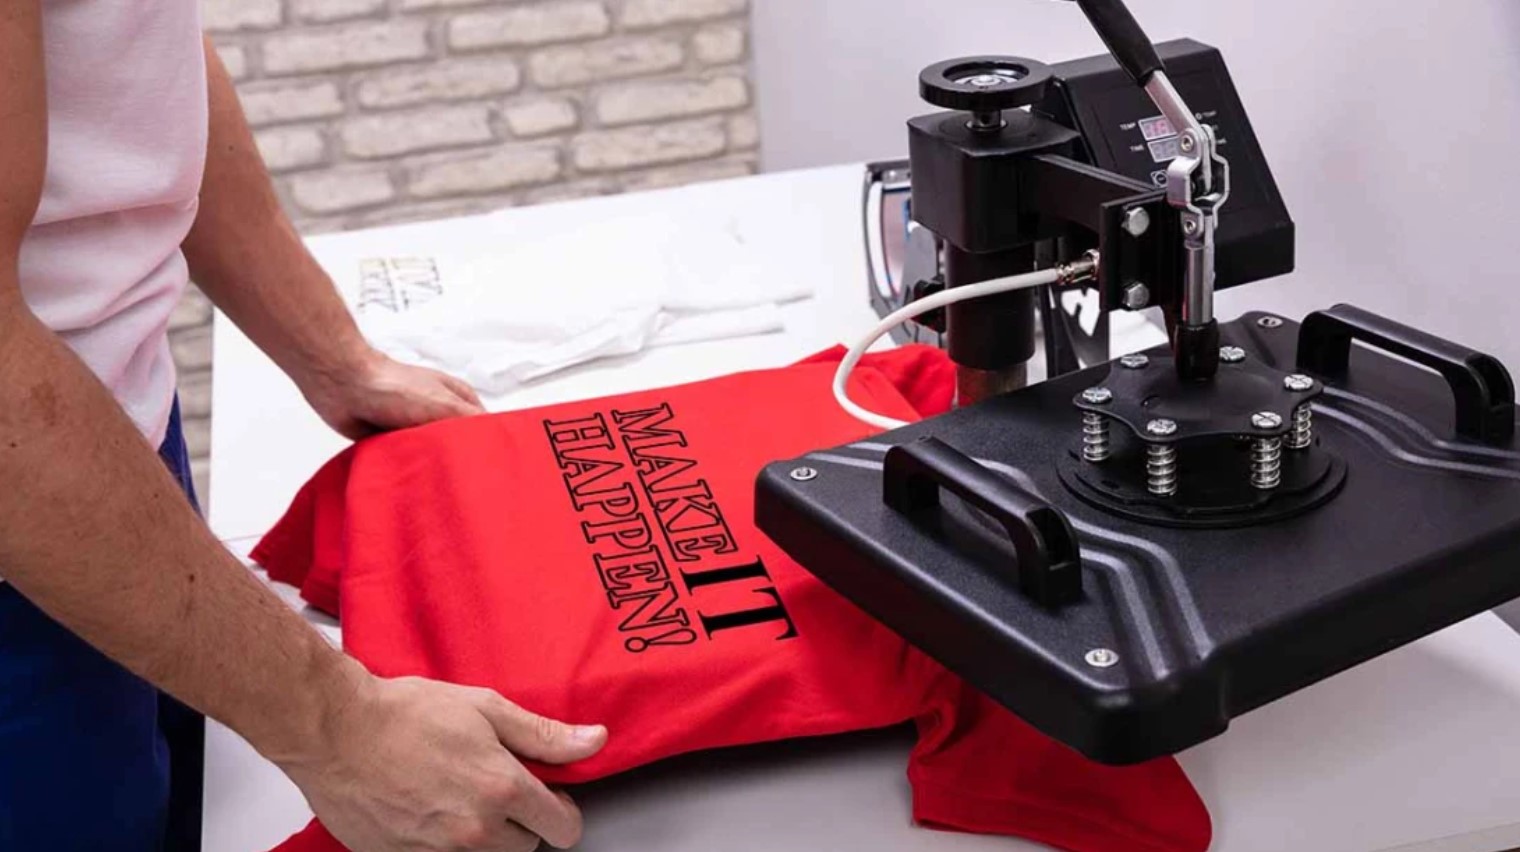 How to Start a Heat Press Tshirt Business at Home